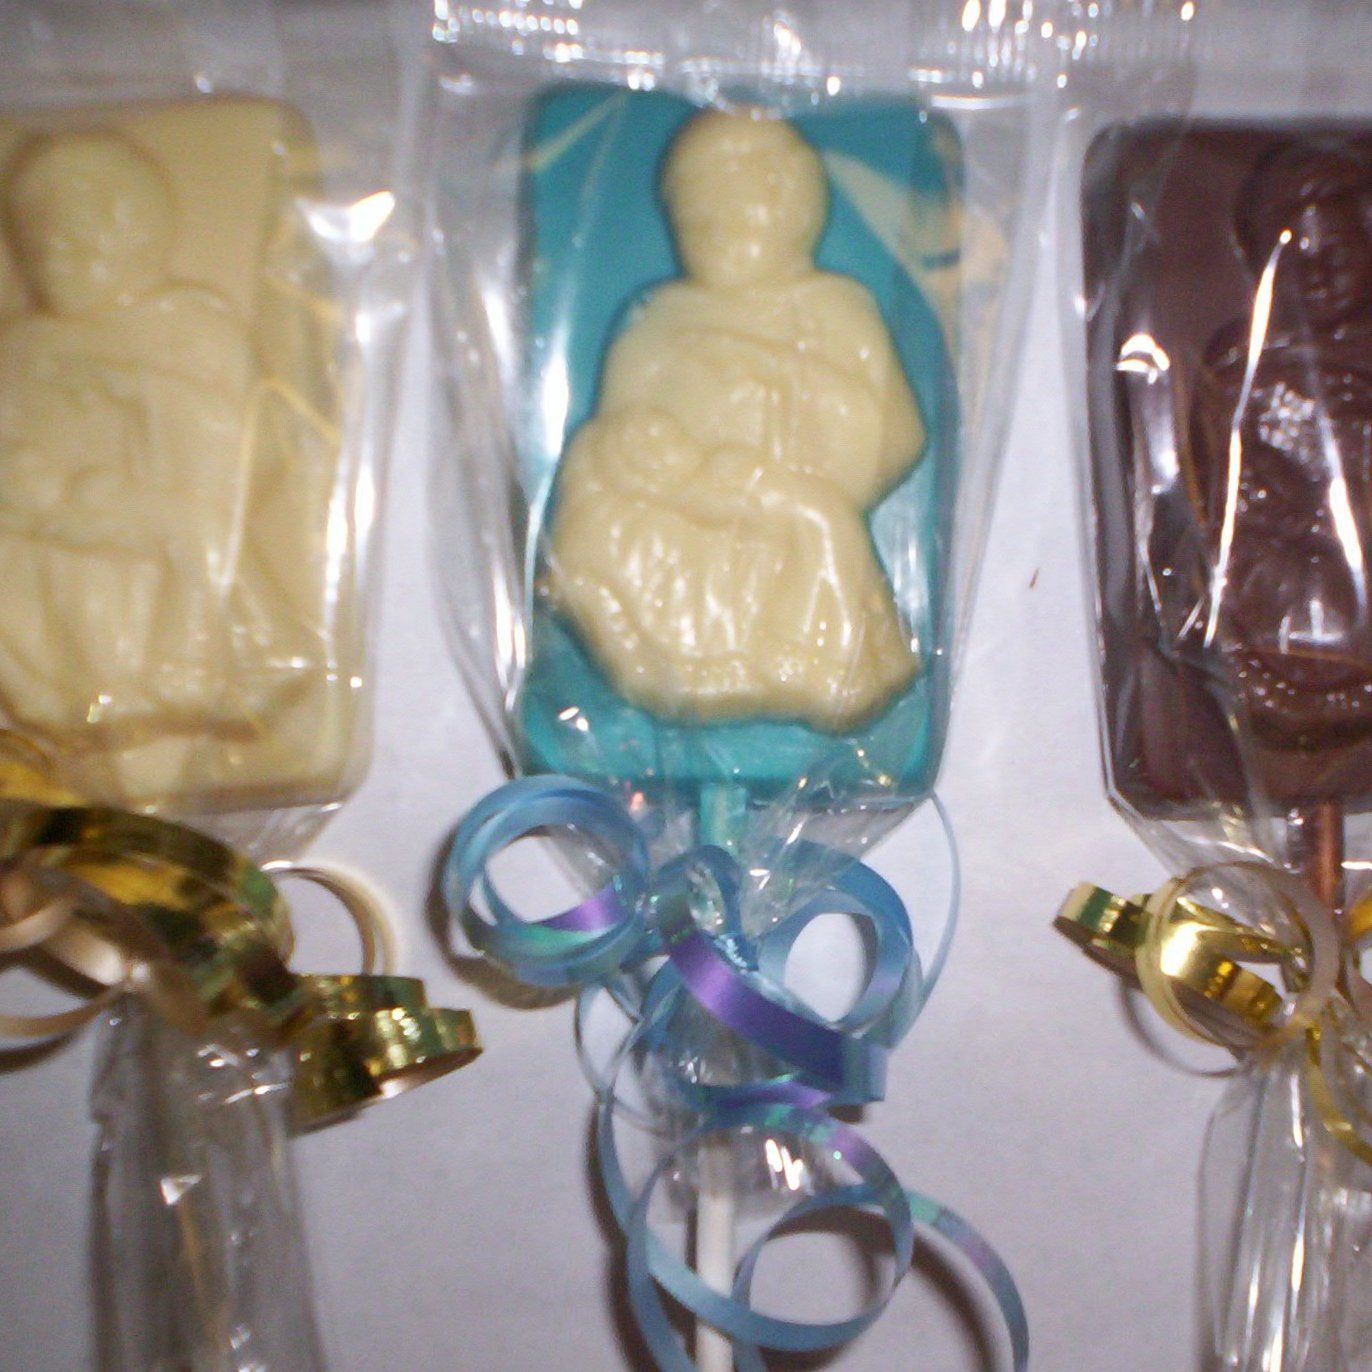 Chocolate Christening/Baptism Party Favors | Delicious Creations near Chicago in Hickory Hills, IL 